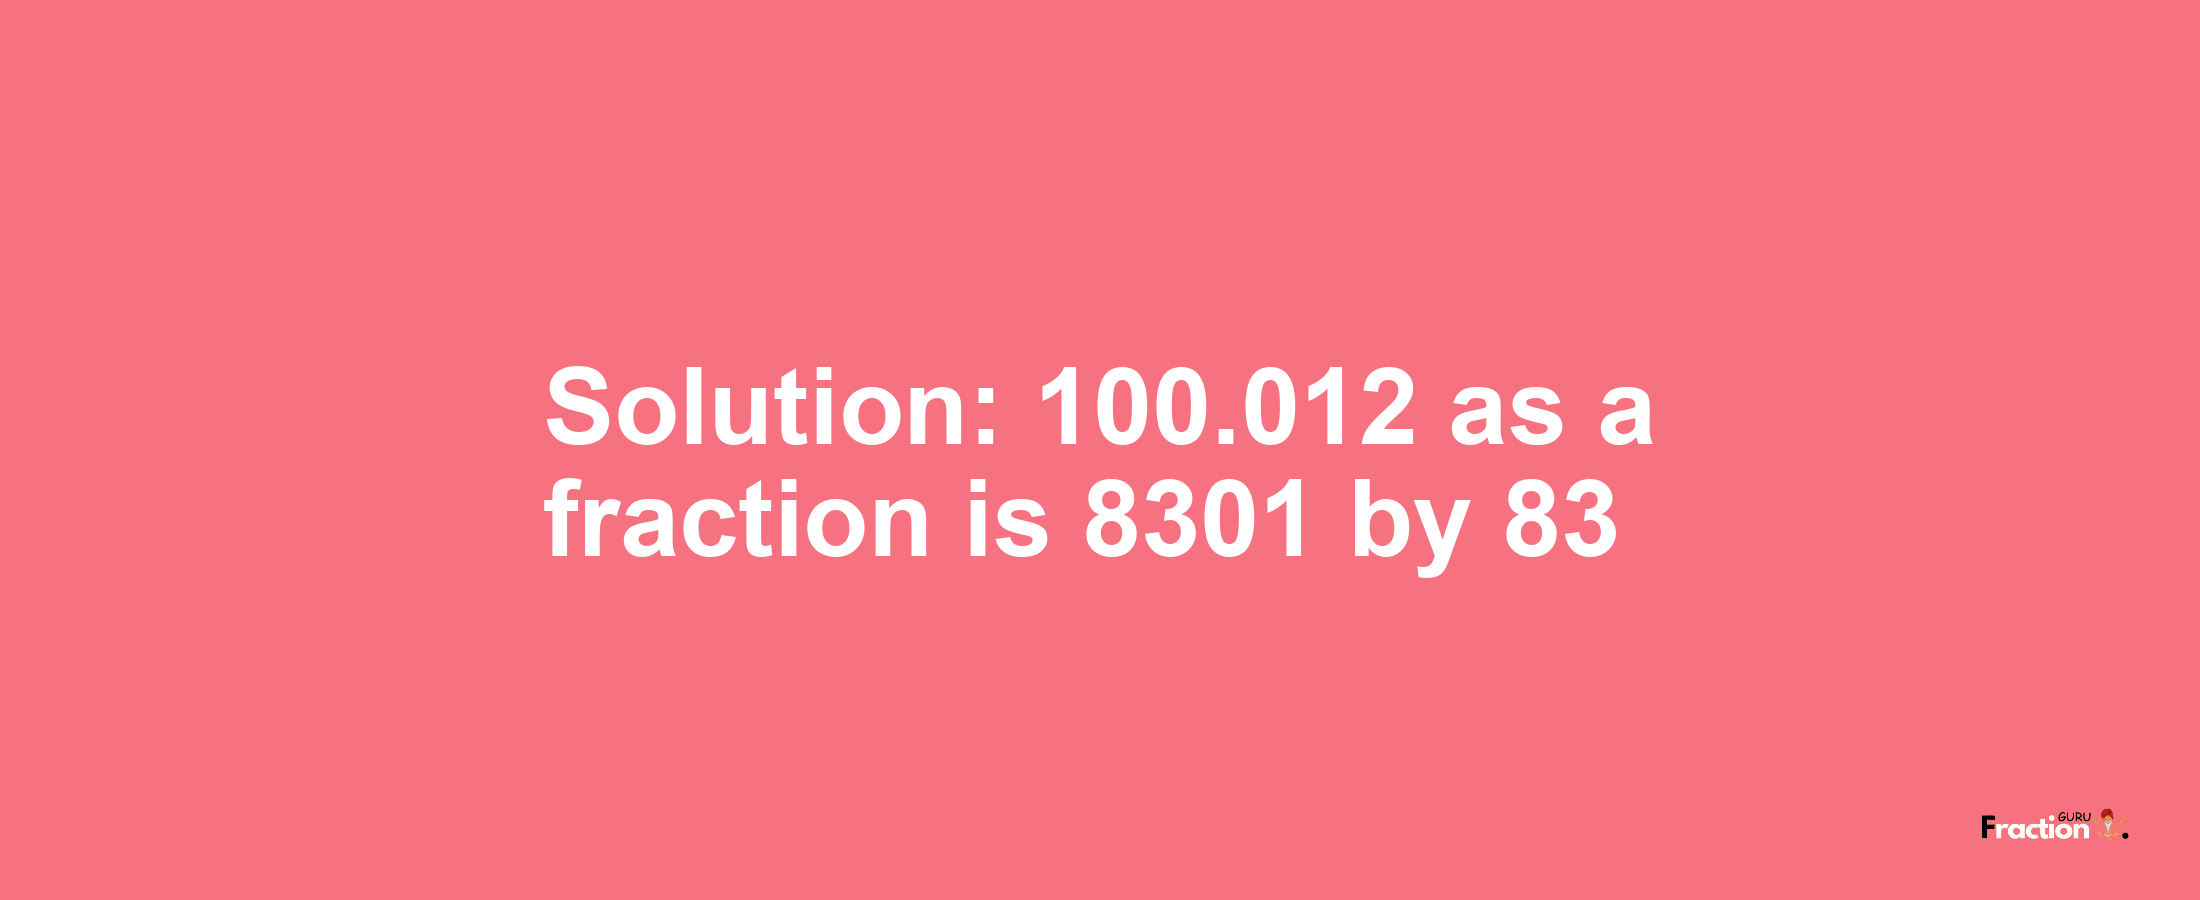 Solution:100.012 as a fraction is 8301/83